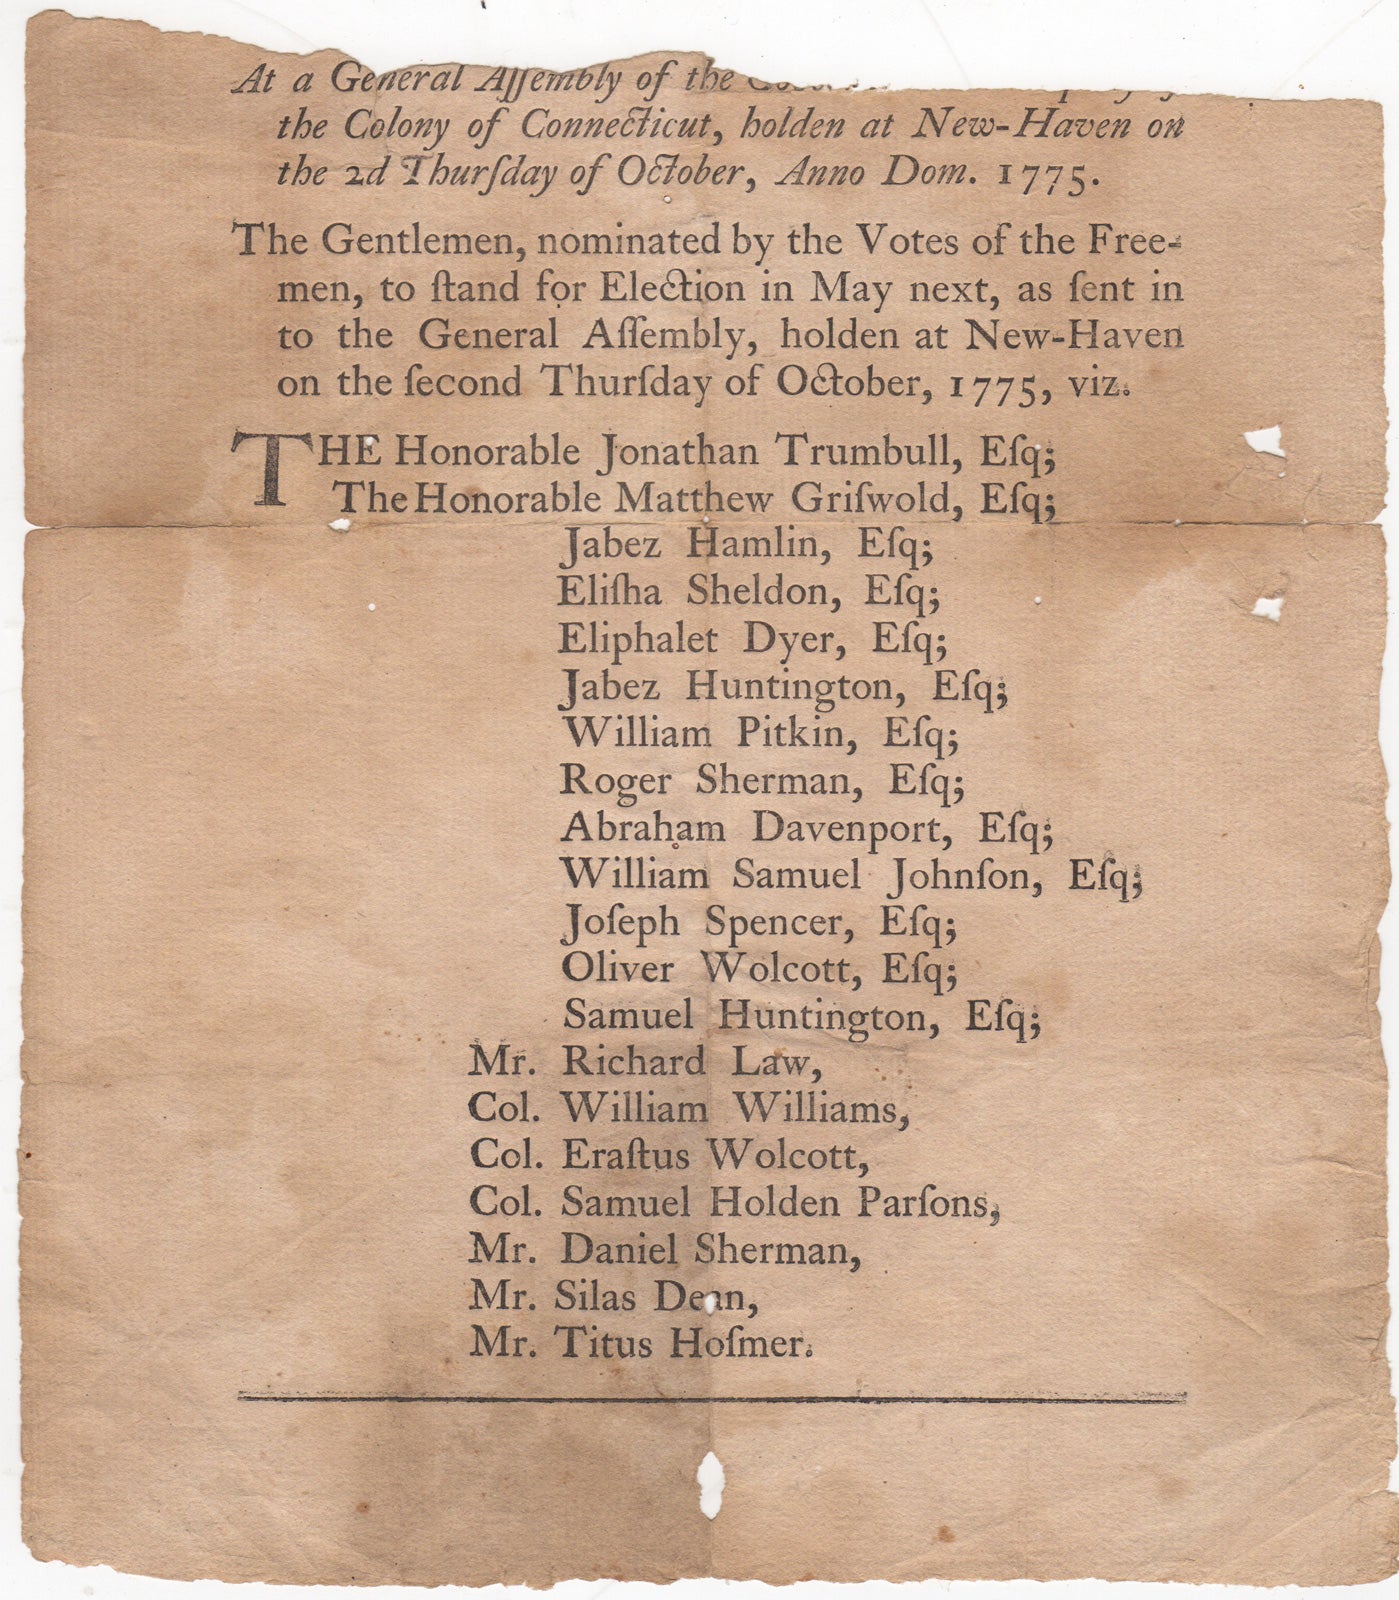 [American Revolution] [Connecticut] - [Broadside] [Nomination for Election in May, 1776] at a General Assembly of the Governor and Company of the Colony of Connecticut, Holden at New-Haven on the 2d Thursday of October, Anno Dom. 1775. The Gentlemen, Nominated by the Votes of the Freemen, to Stand for Election in May Next